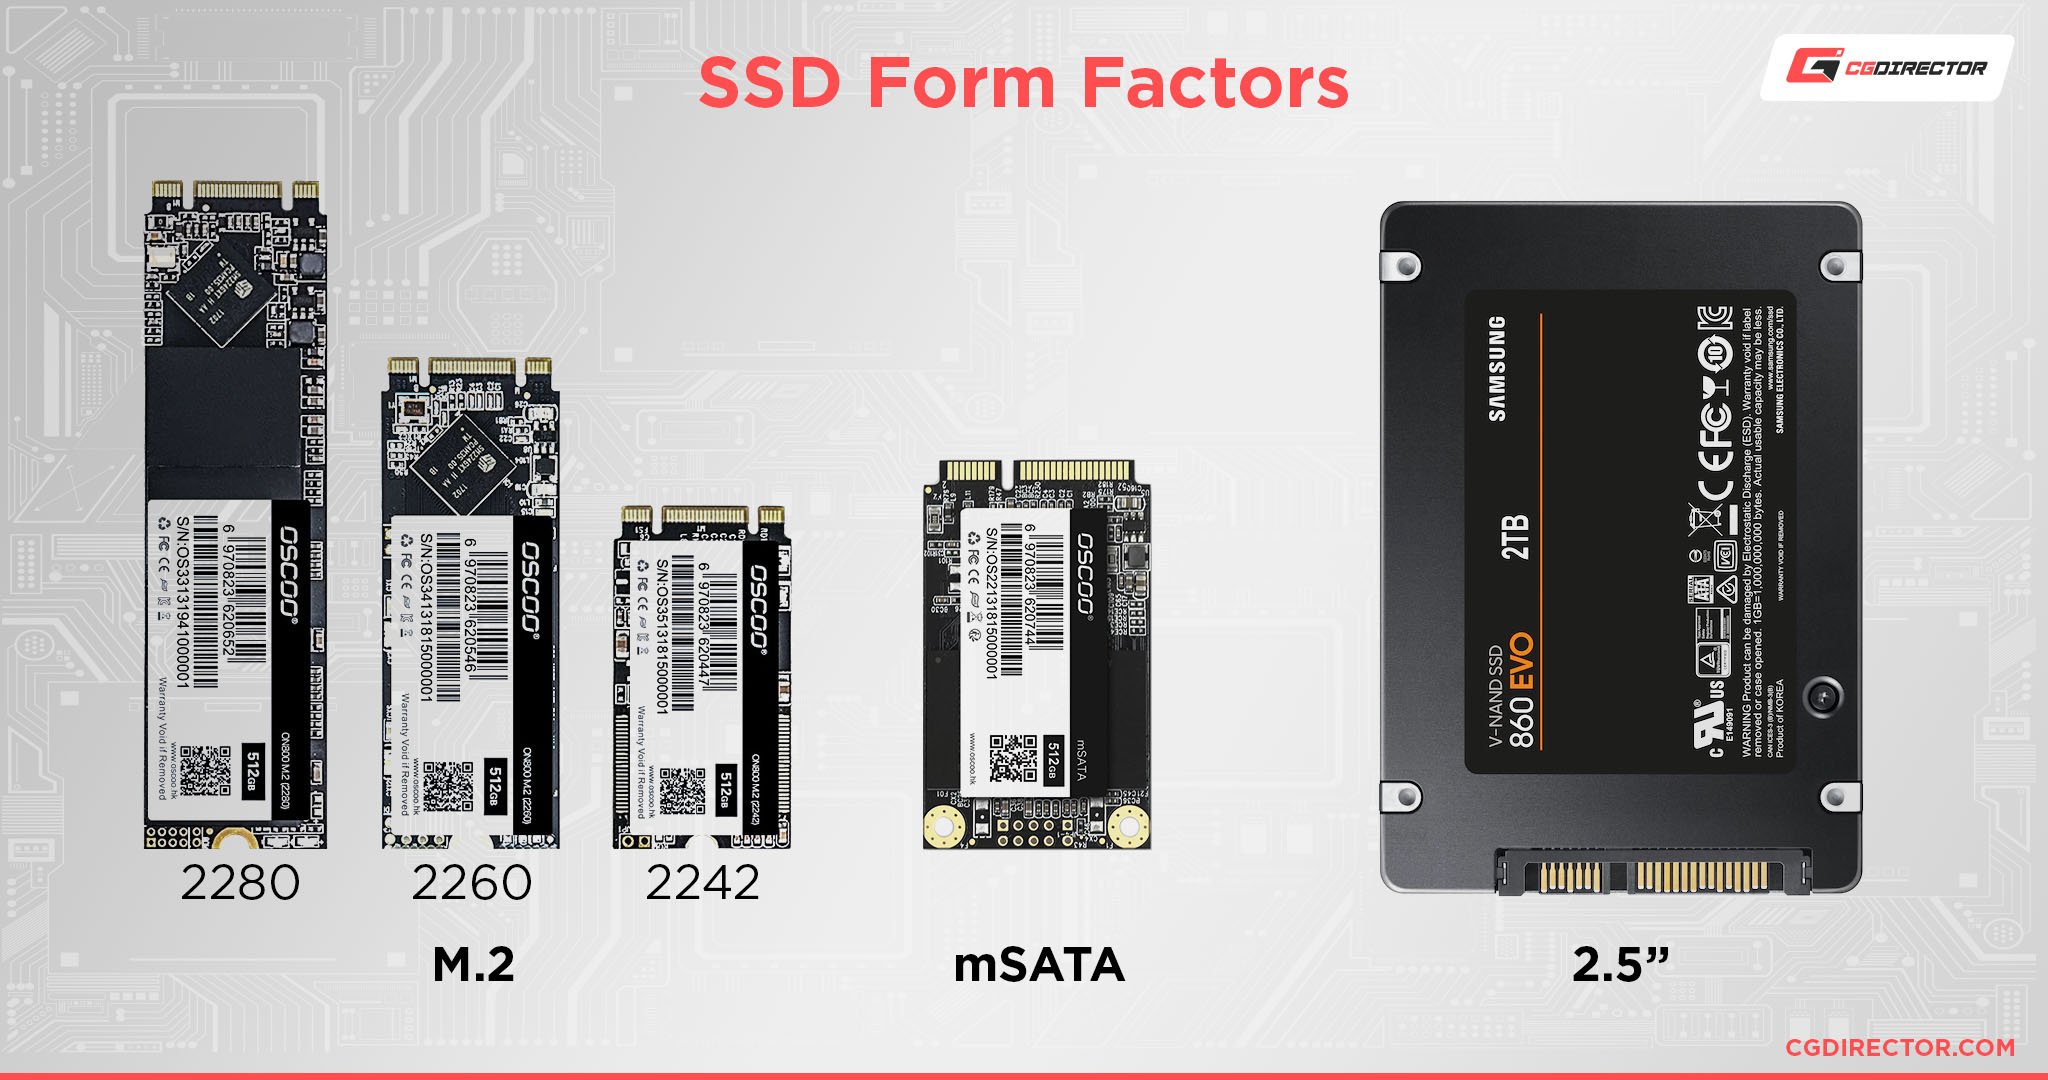 Nvme Sata Ssd Explained Whats The Differences 8292